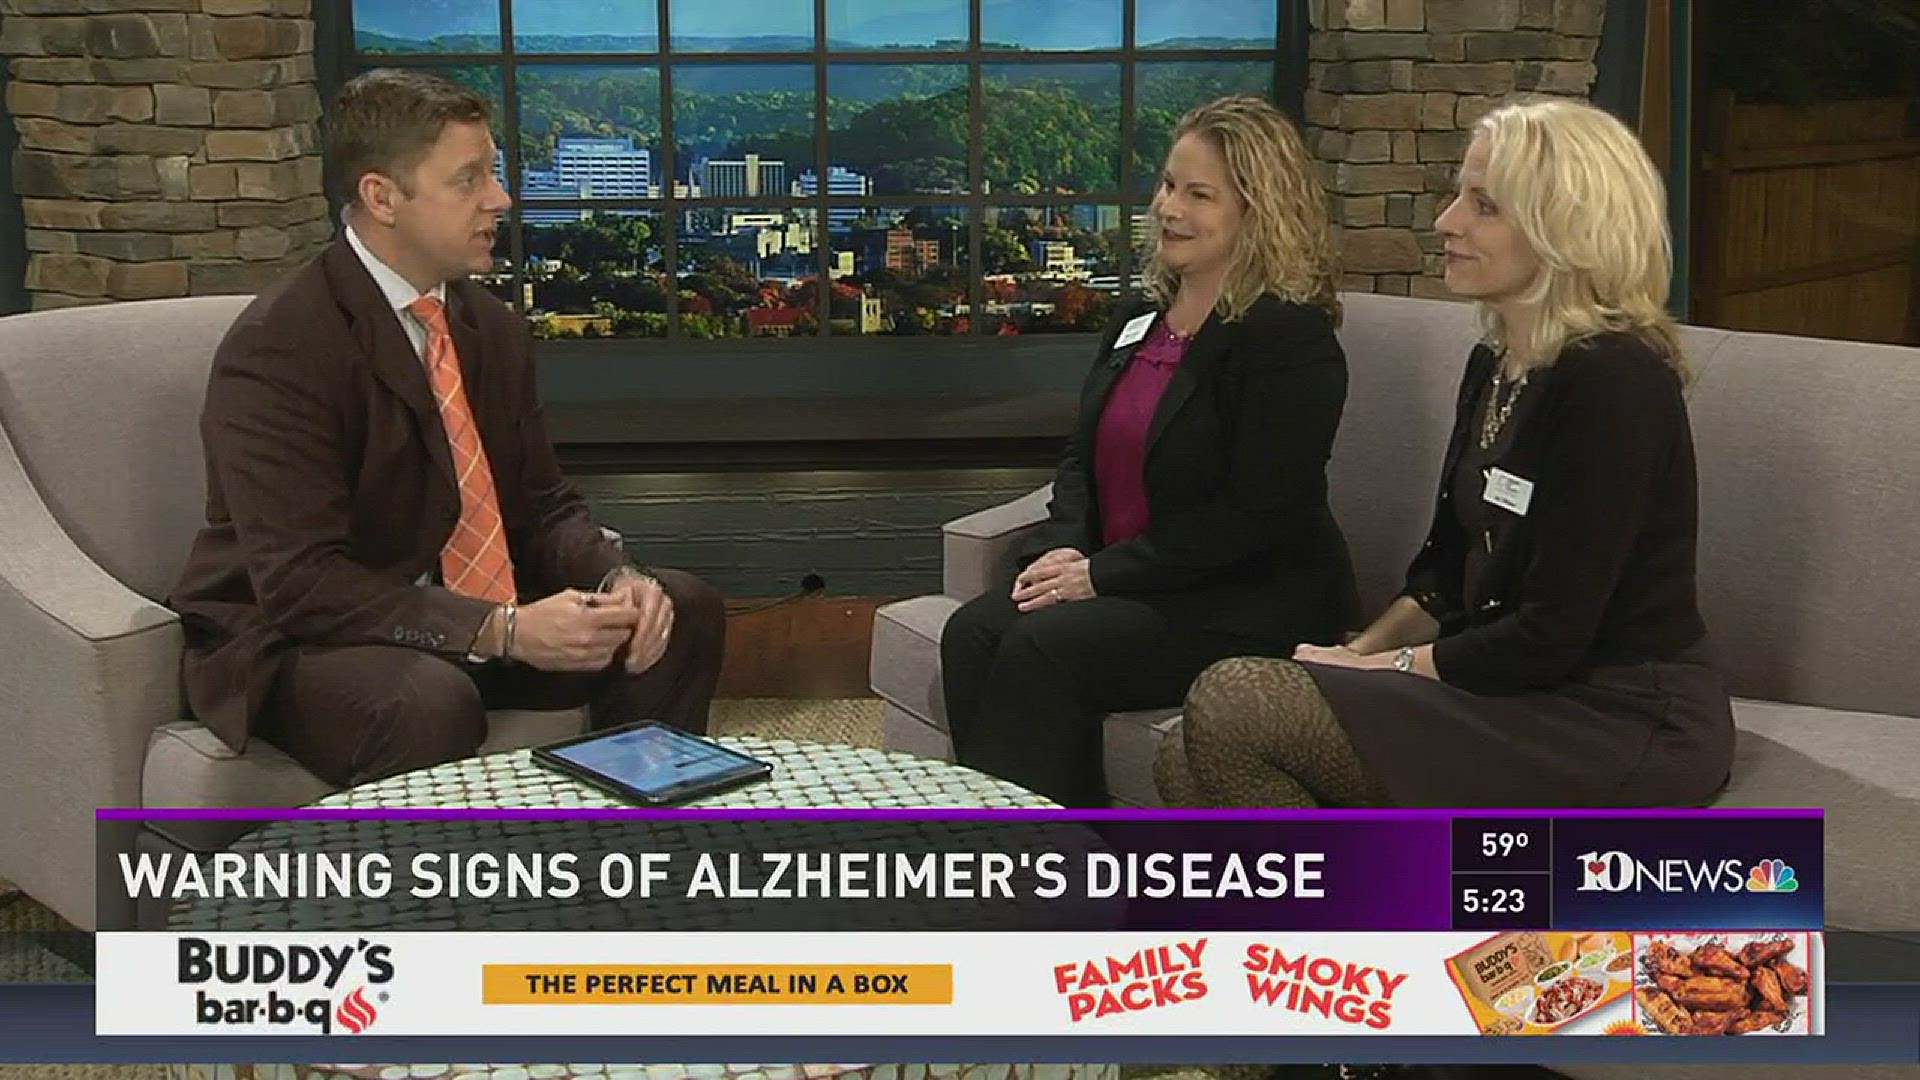 Nov. 15, 2016: Rebekah Wilson from Alzheimer's Tennessee and Joy Wilson from 'Right at Home' senior care services discuss the warning signs of Alzheimer's disease, and the impact the disease has on patients and caregivers.